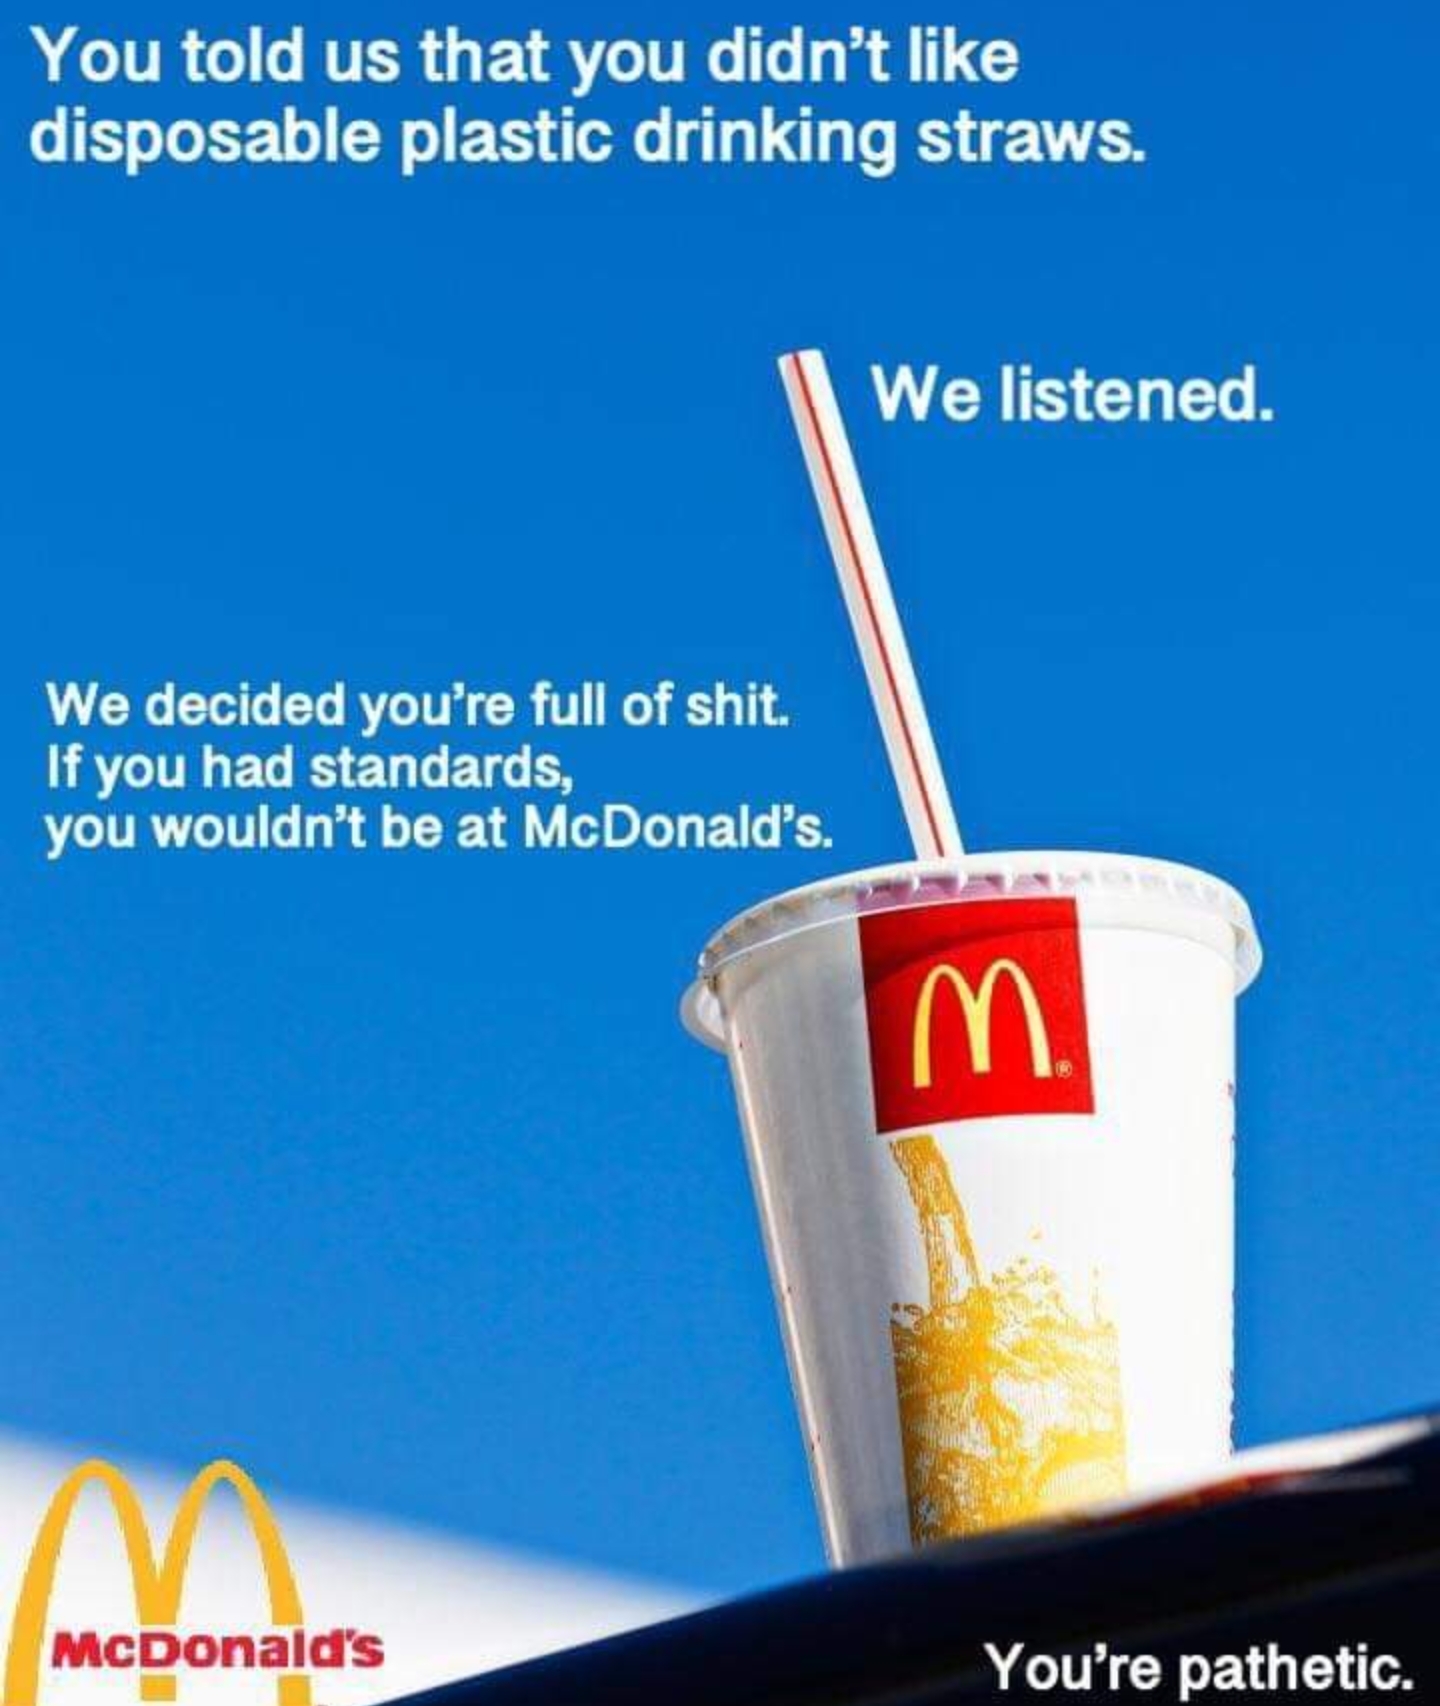 you told us that you didn t like disposable plastic drinking straws - You told us that you didn't disposable plastic drinking straws. We listened. We decided you're full of shit. If you had standards, you wouldn't be at McDonald's E McDonald's You're path